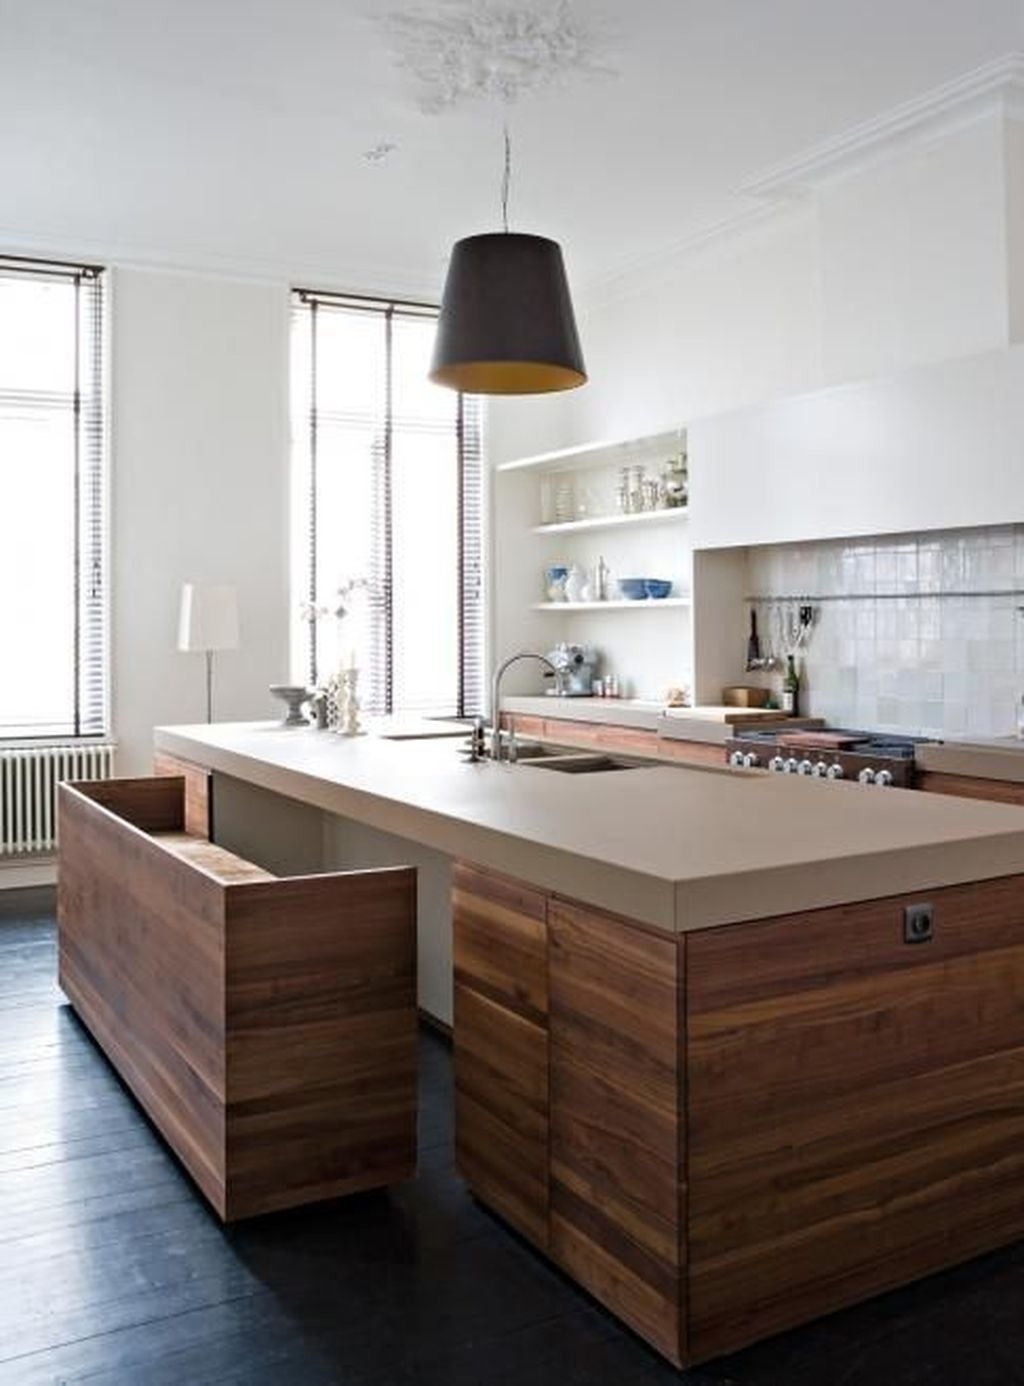 Superb Kitchen Design Ideas That You Can Try 13